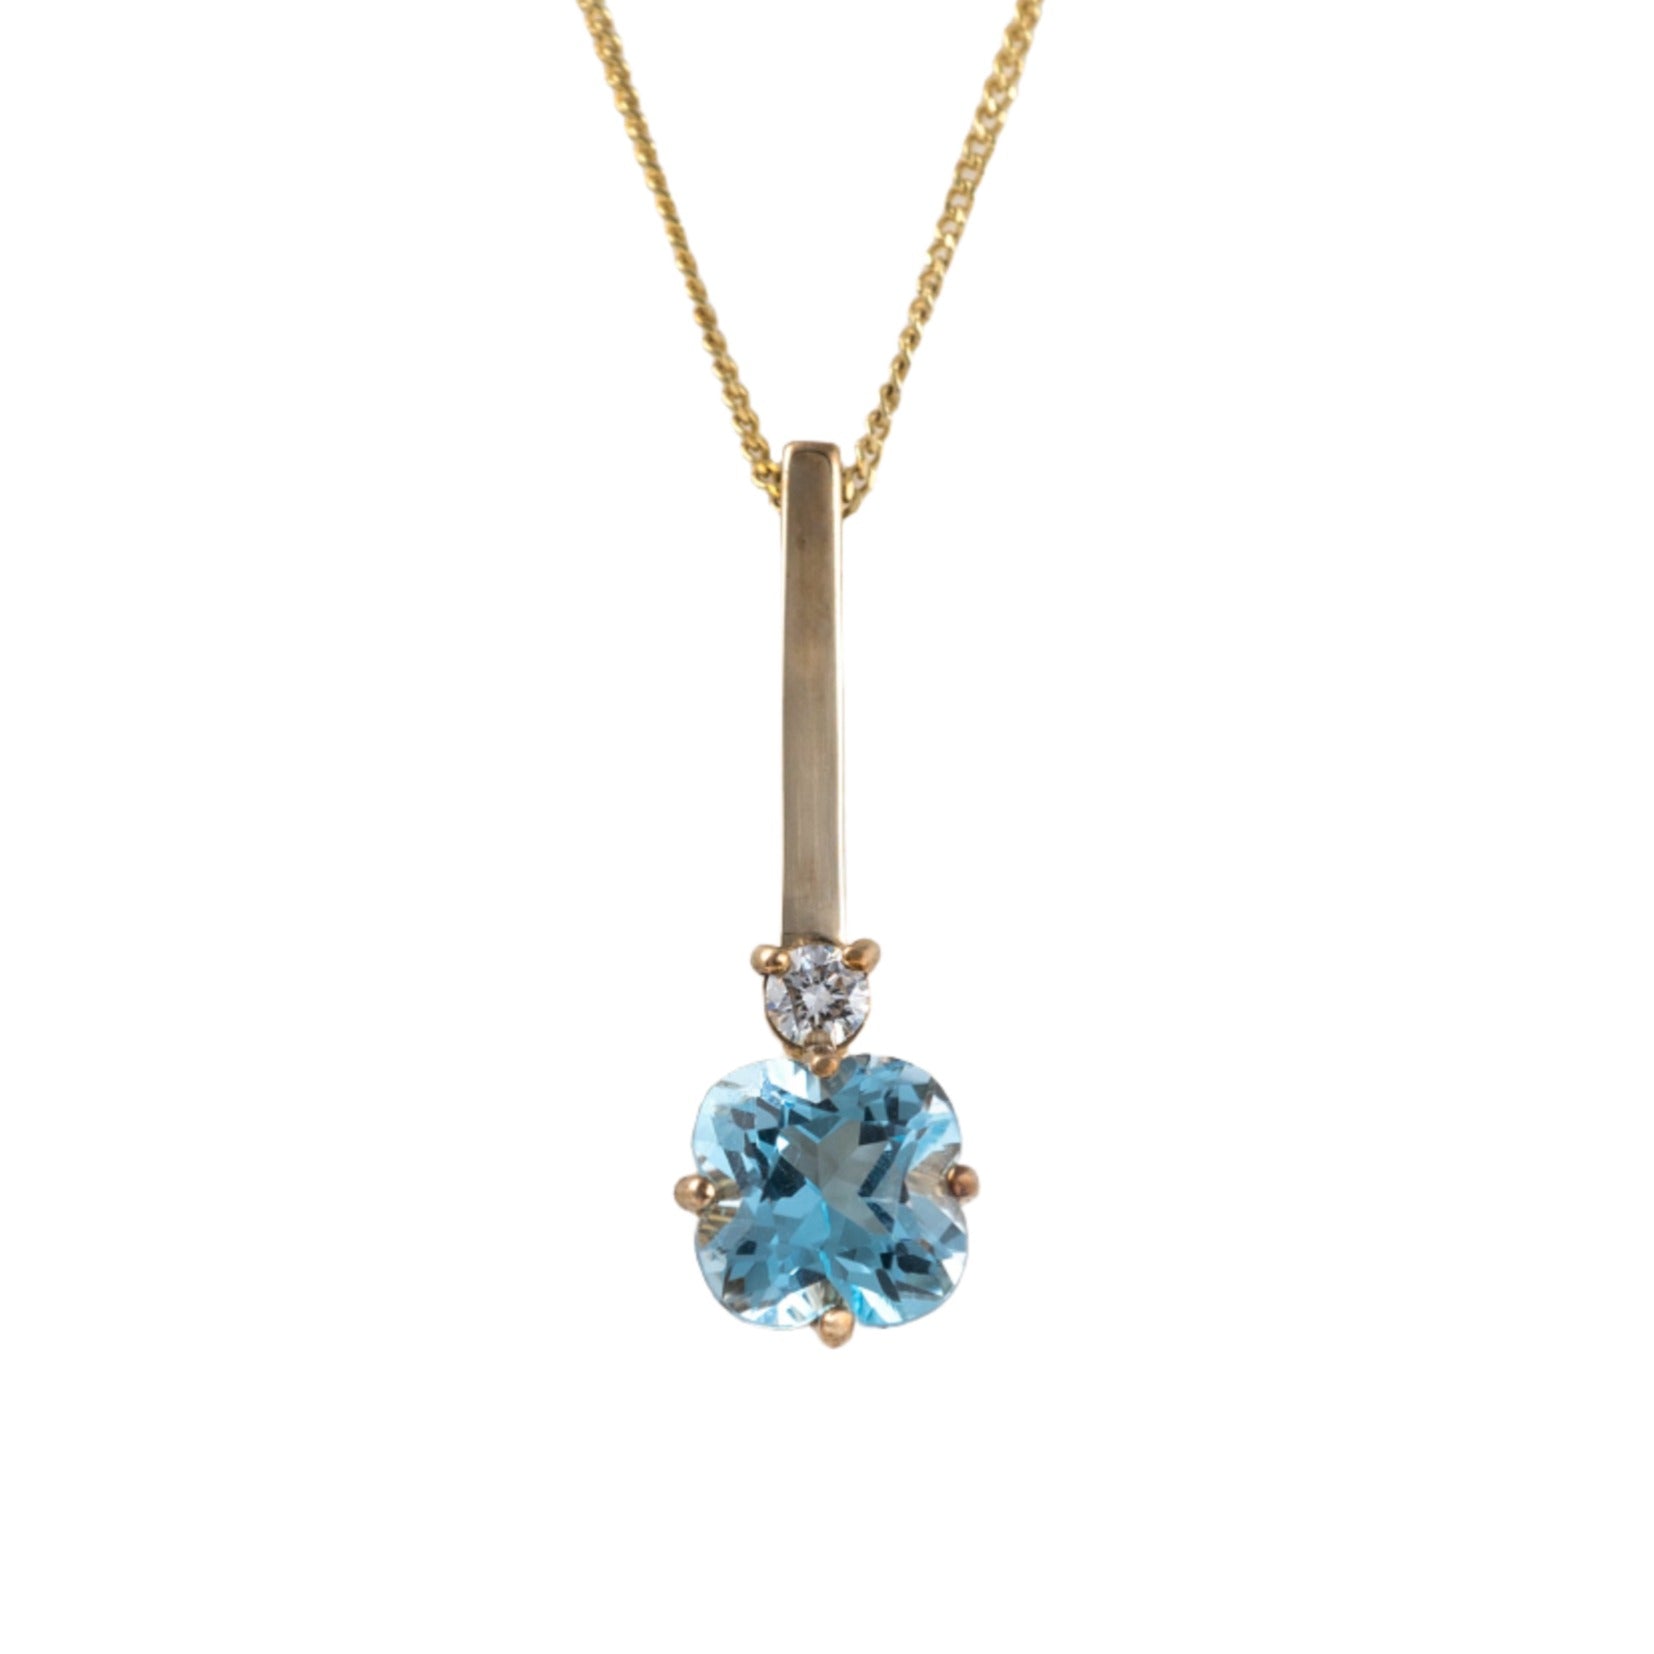 Swiss Blue Topaz necklace with diamond accent